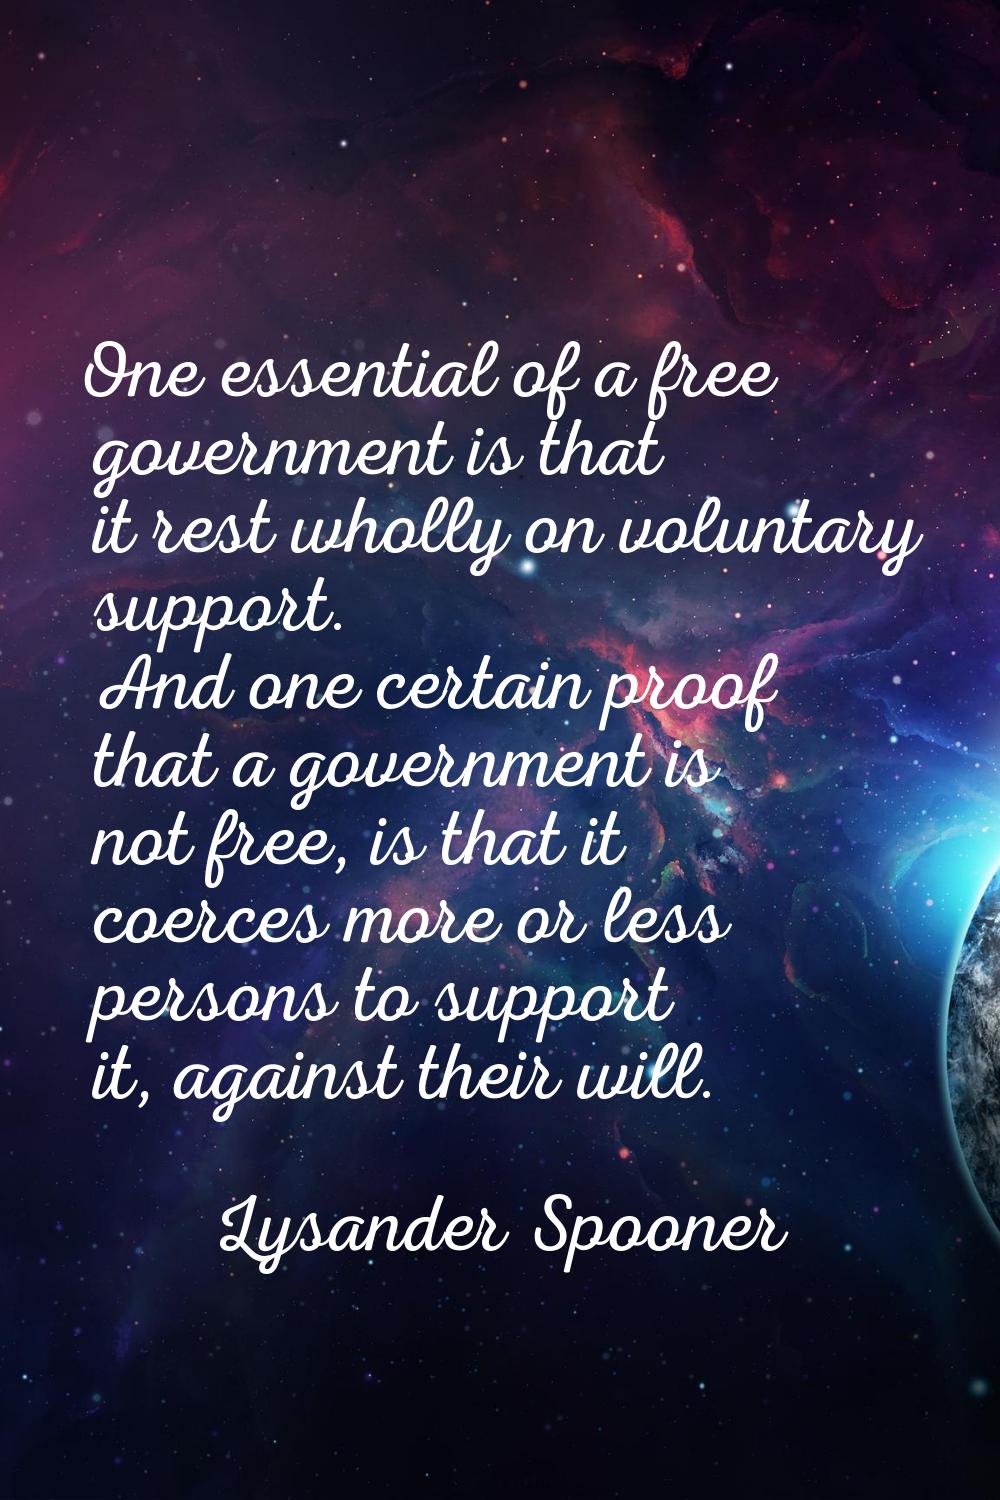 One essential of a free government is that it rest wholly on voluntary support. And one certain pro